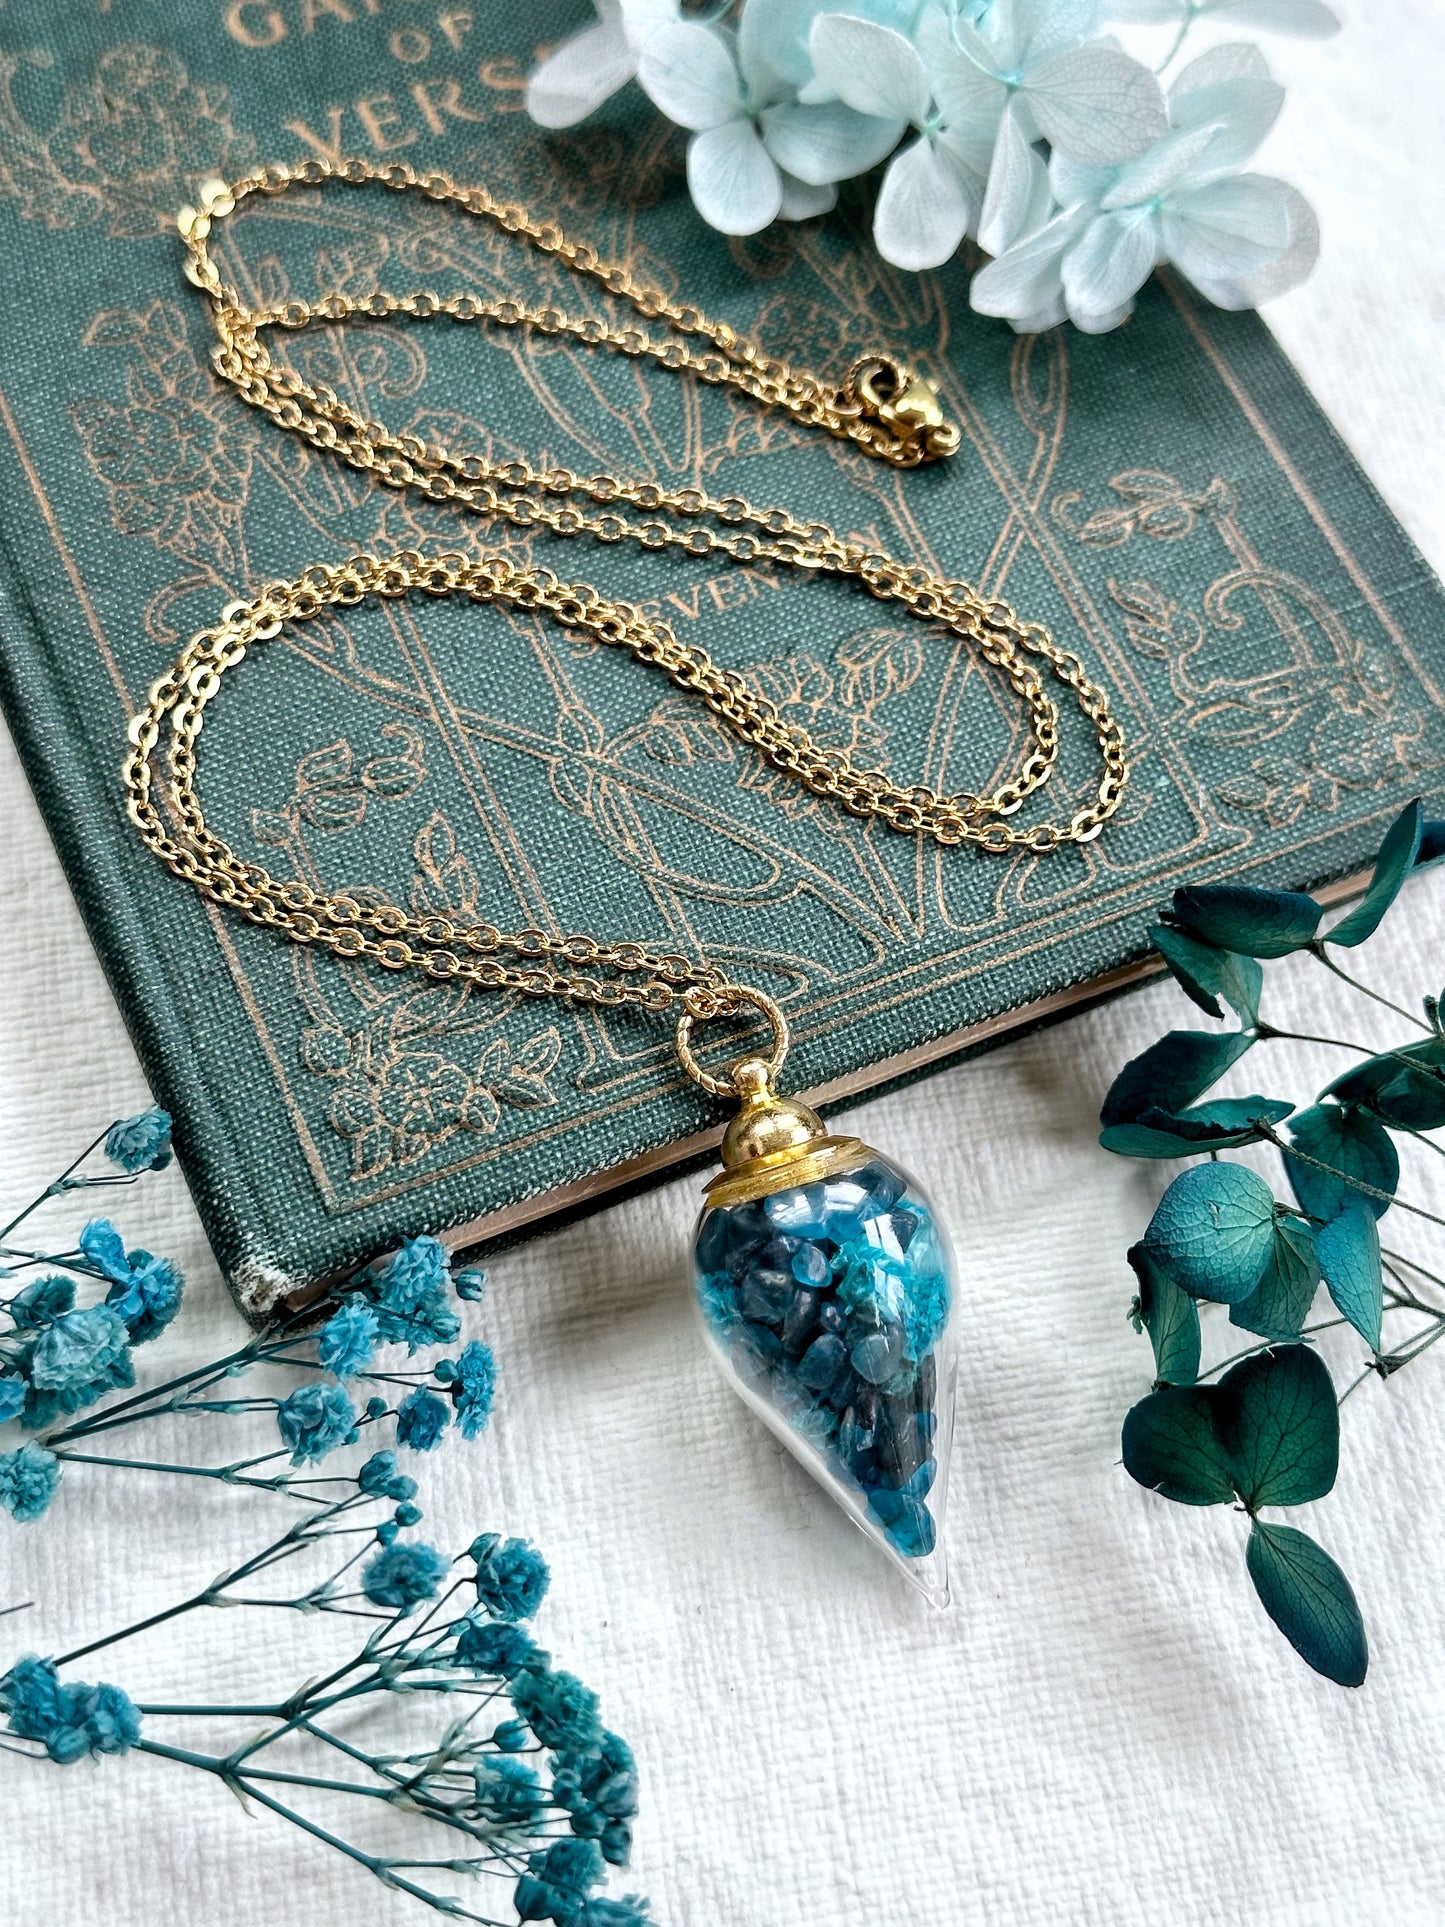 Cleansing Blue Apatite Apothecary Necklace